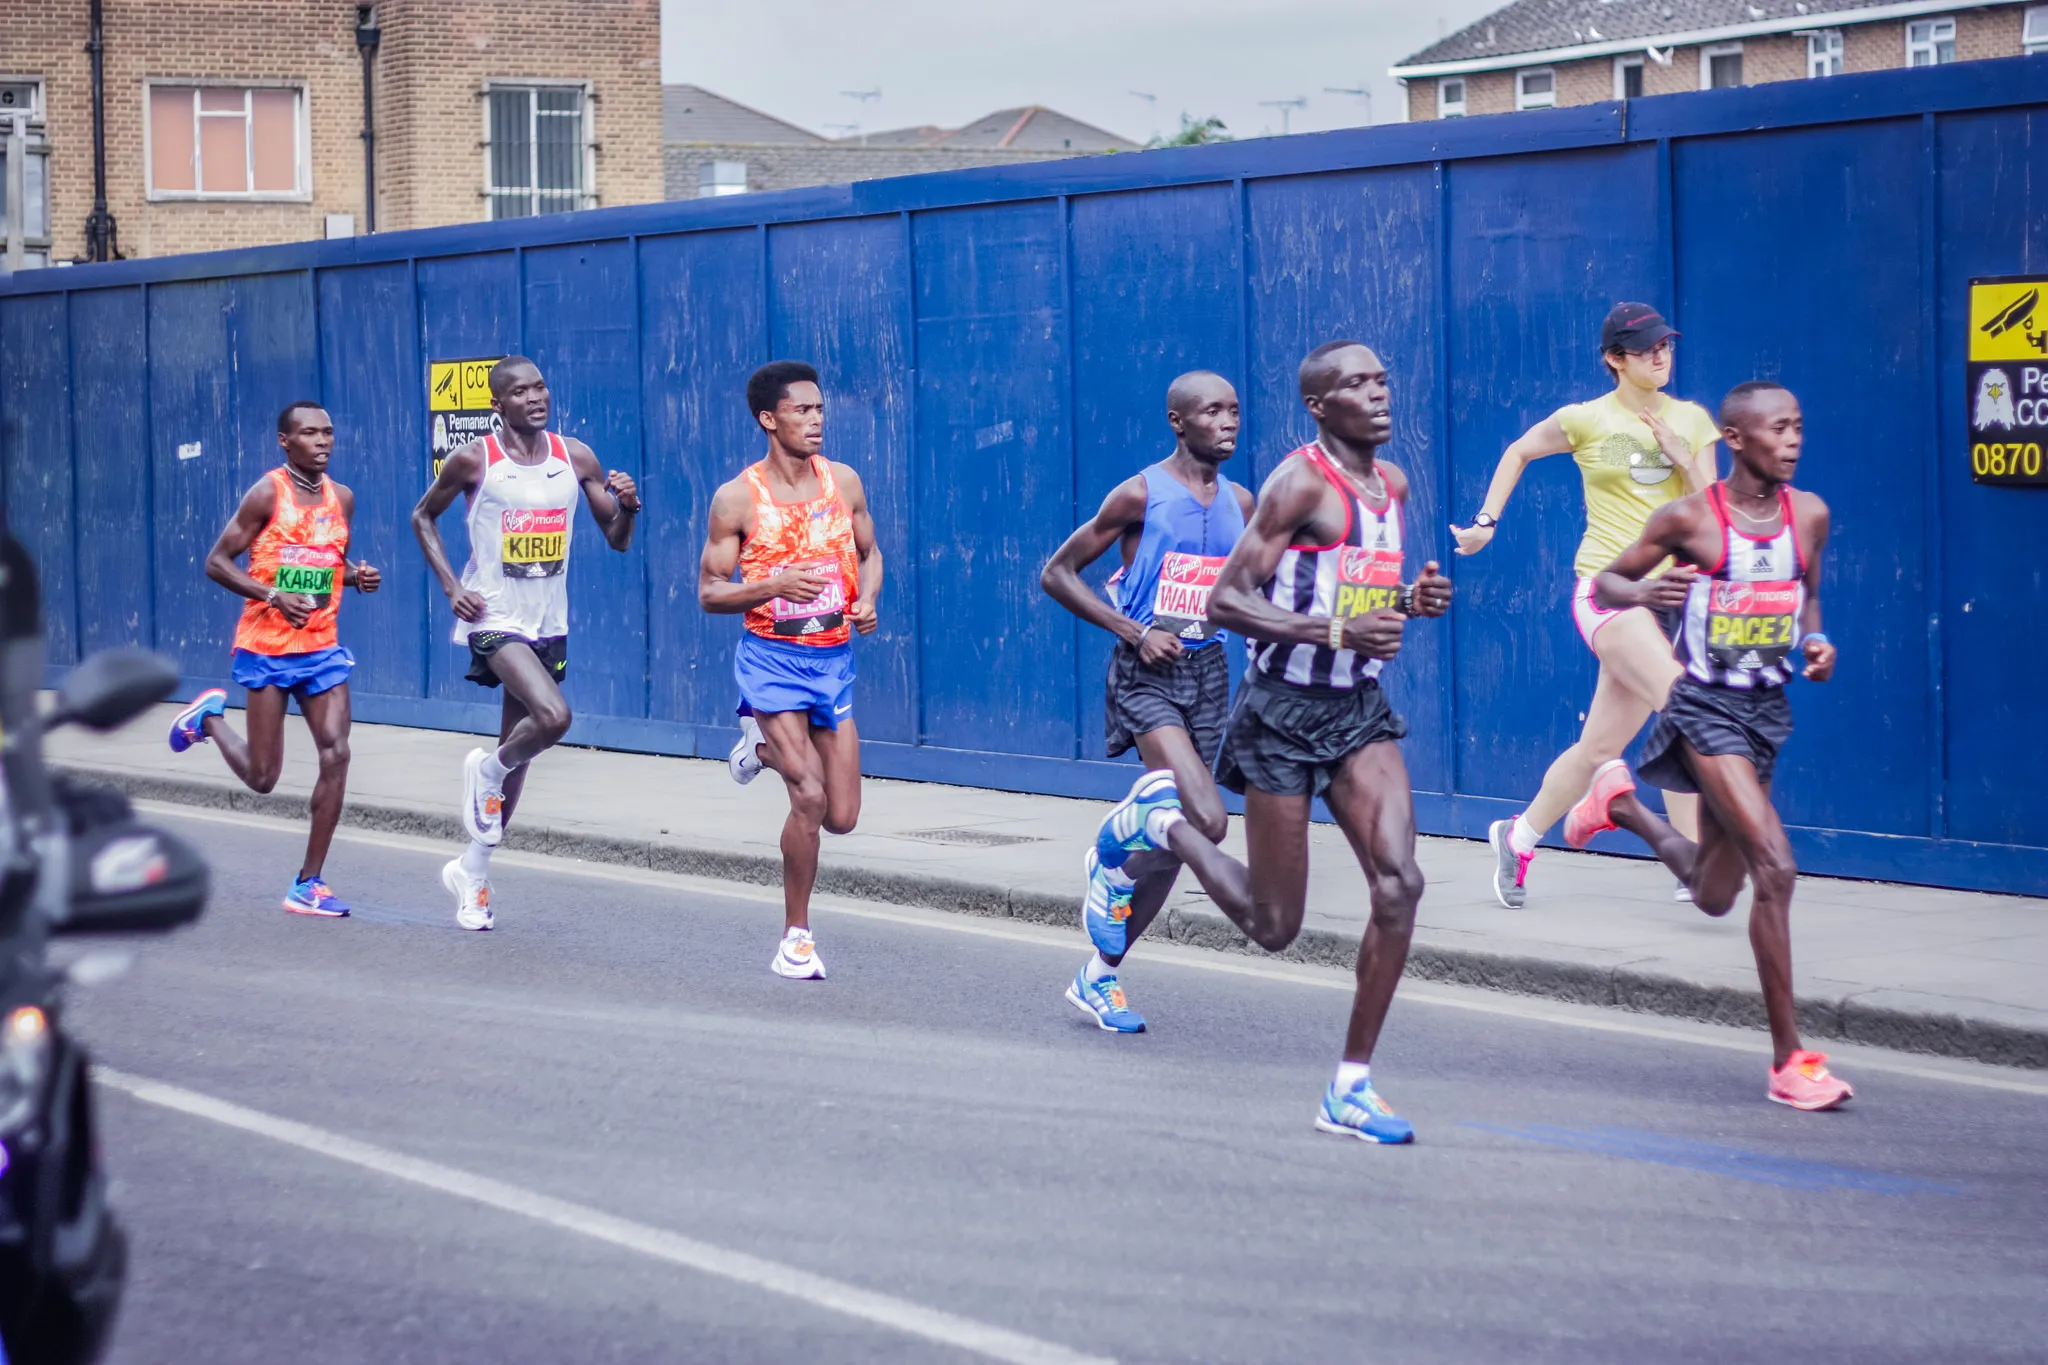 Leading pack with Daniel Wanjiru, further winner of the race! Funny thing, the girl in the background tried to keep their pace, but failed in less than 15 seconds.